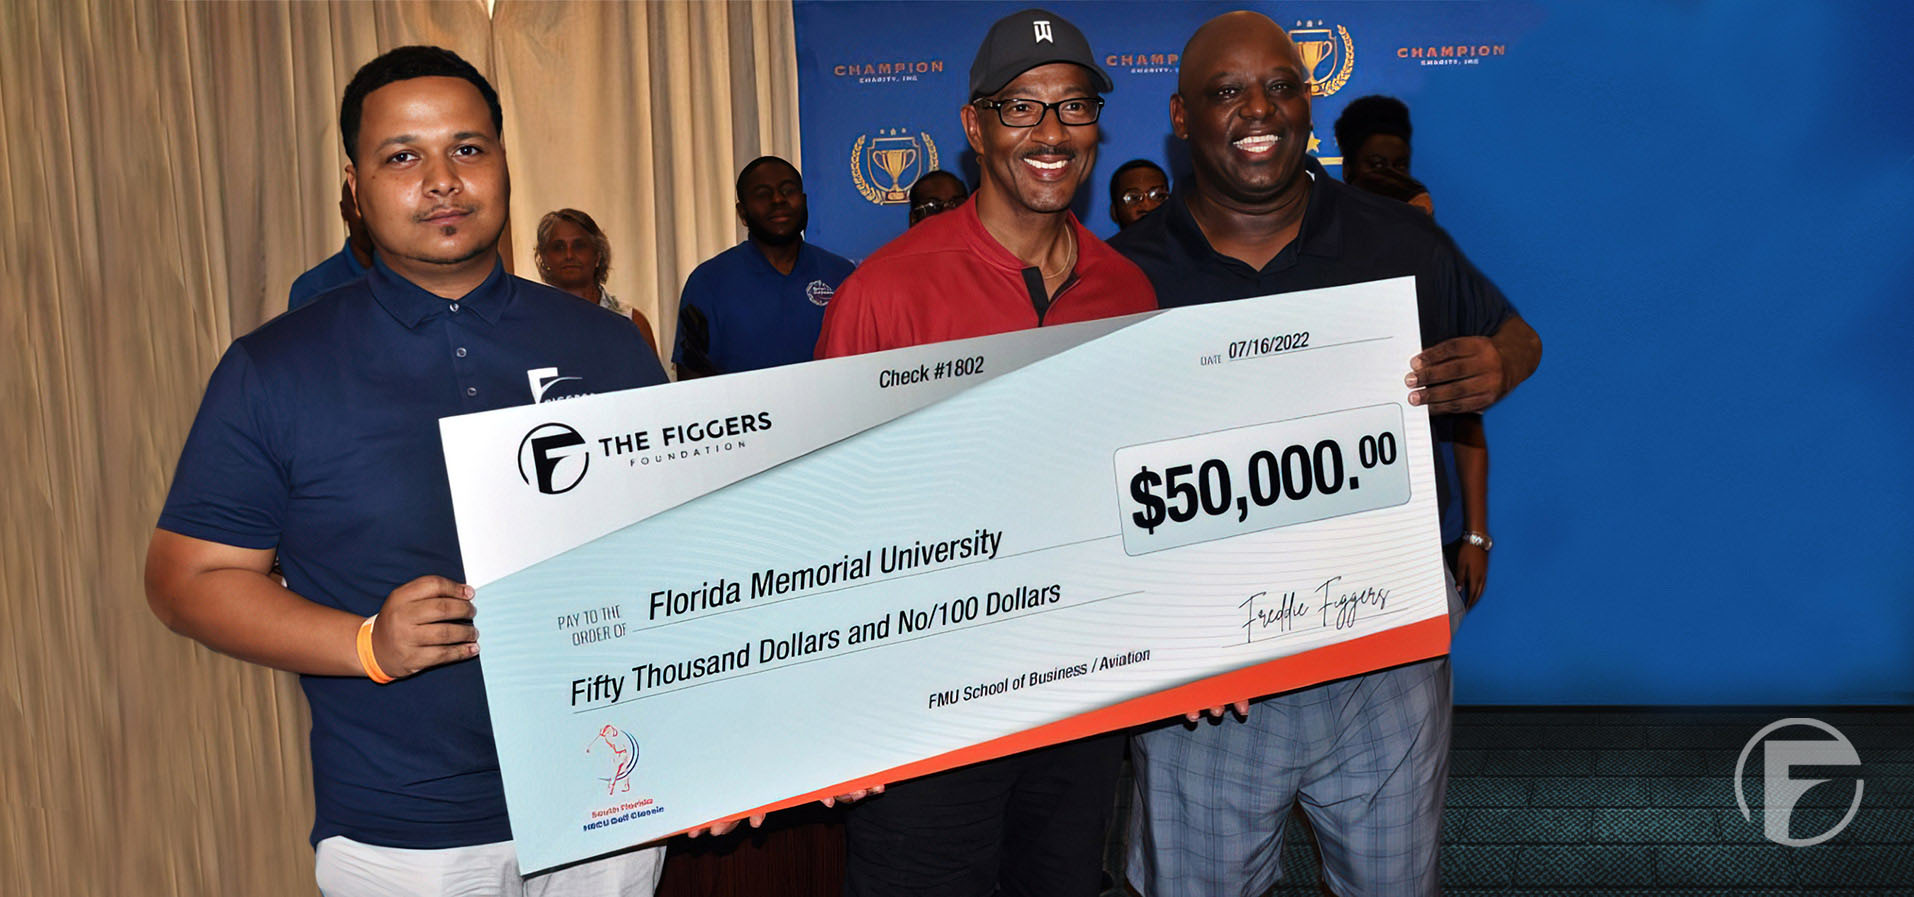 At The Figgers Foundation, we take pride in providing innovative opportunities to pay it forward to the next generation by partnering with Florida Memorial University.